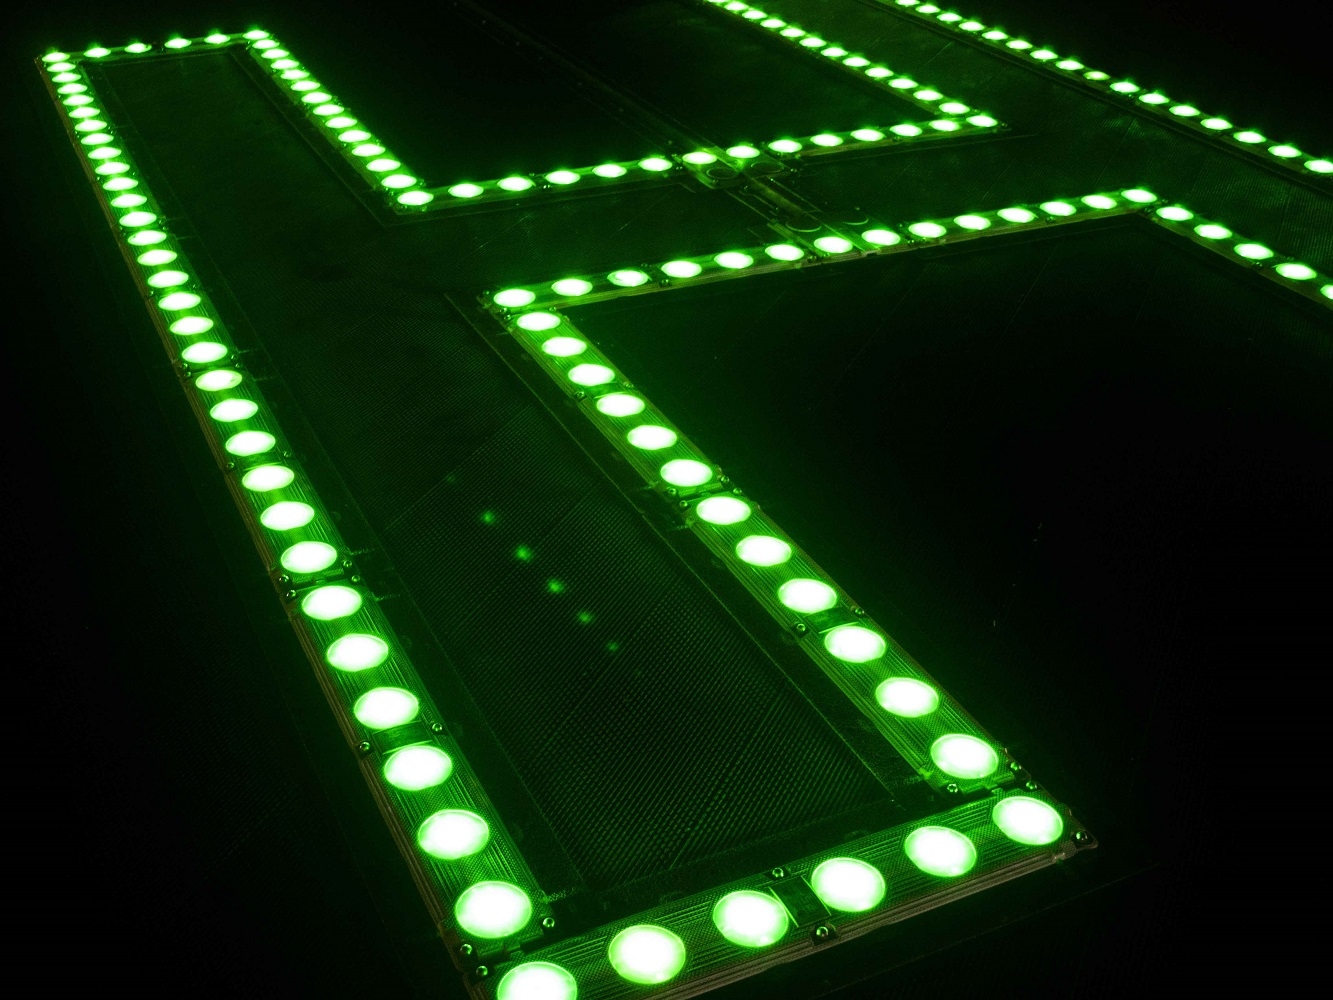 Helicopter landing pad lit up by green lights